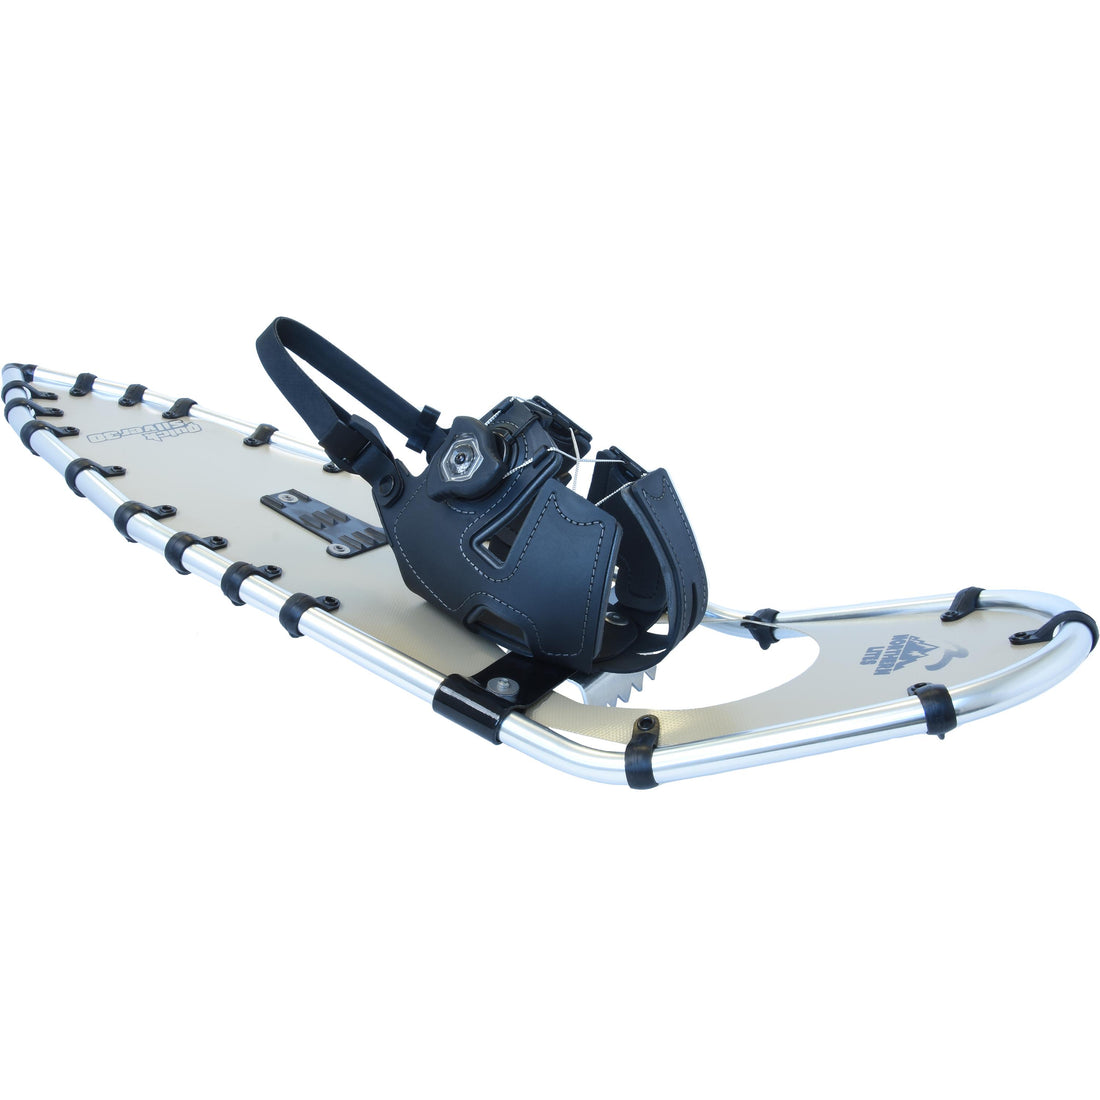 Reliable Recreational Snowshoes | Quicksilver 25 – Northern Lites Outdoors